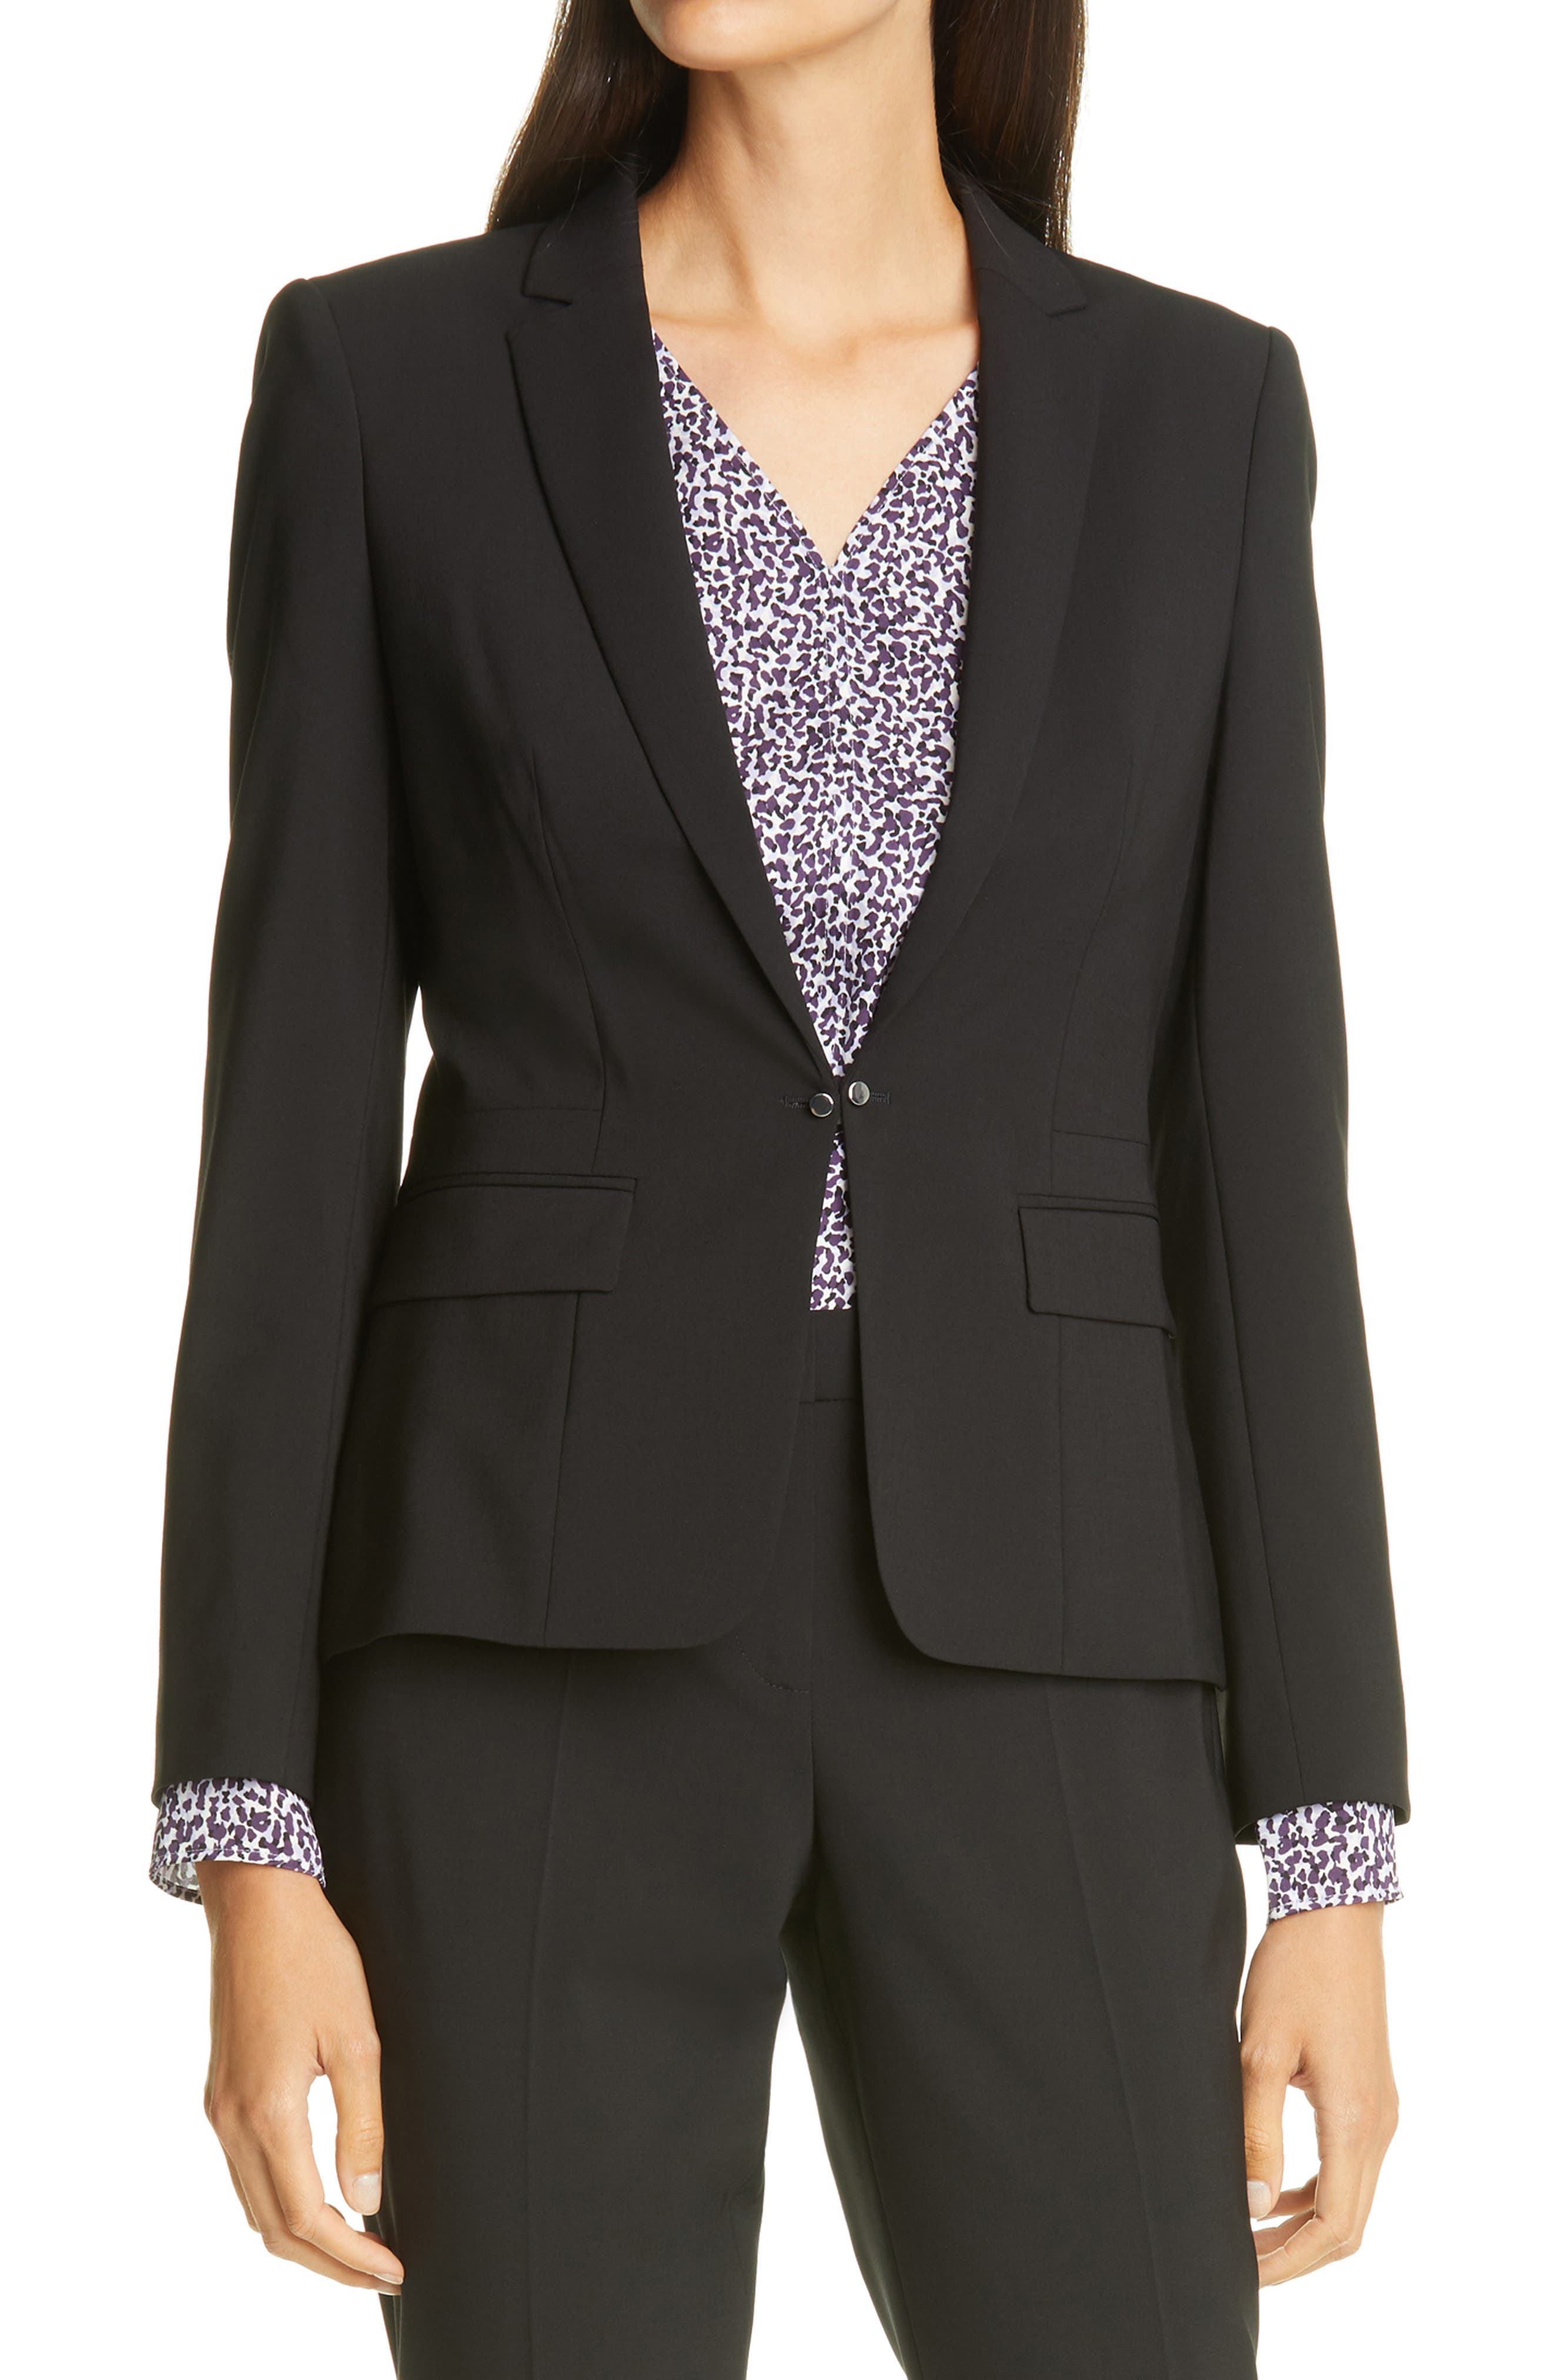 nordstrom dressy pant suits